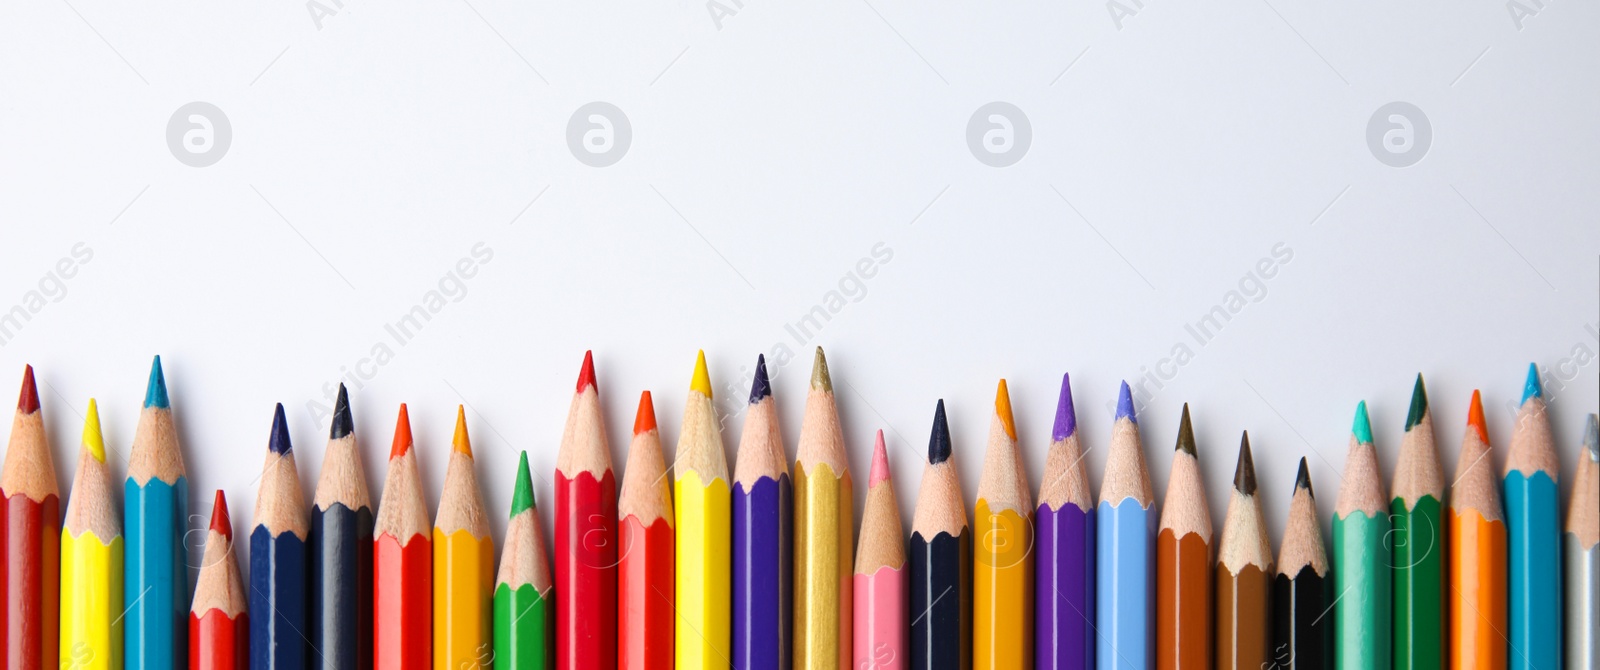 Image of Color pencils on white background, top view with space for text. Banner design